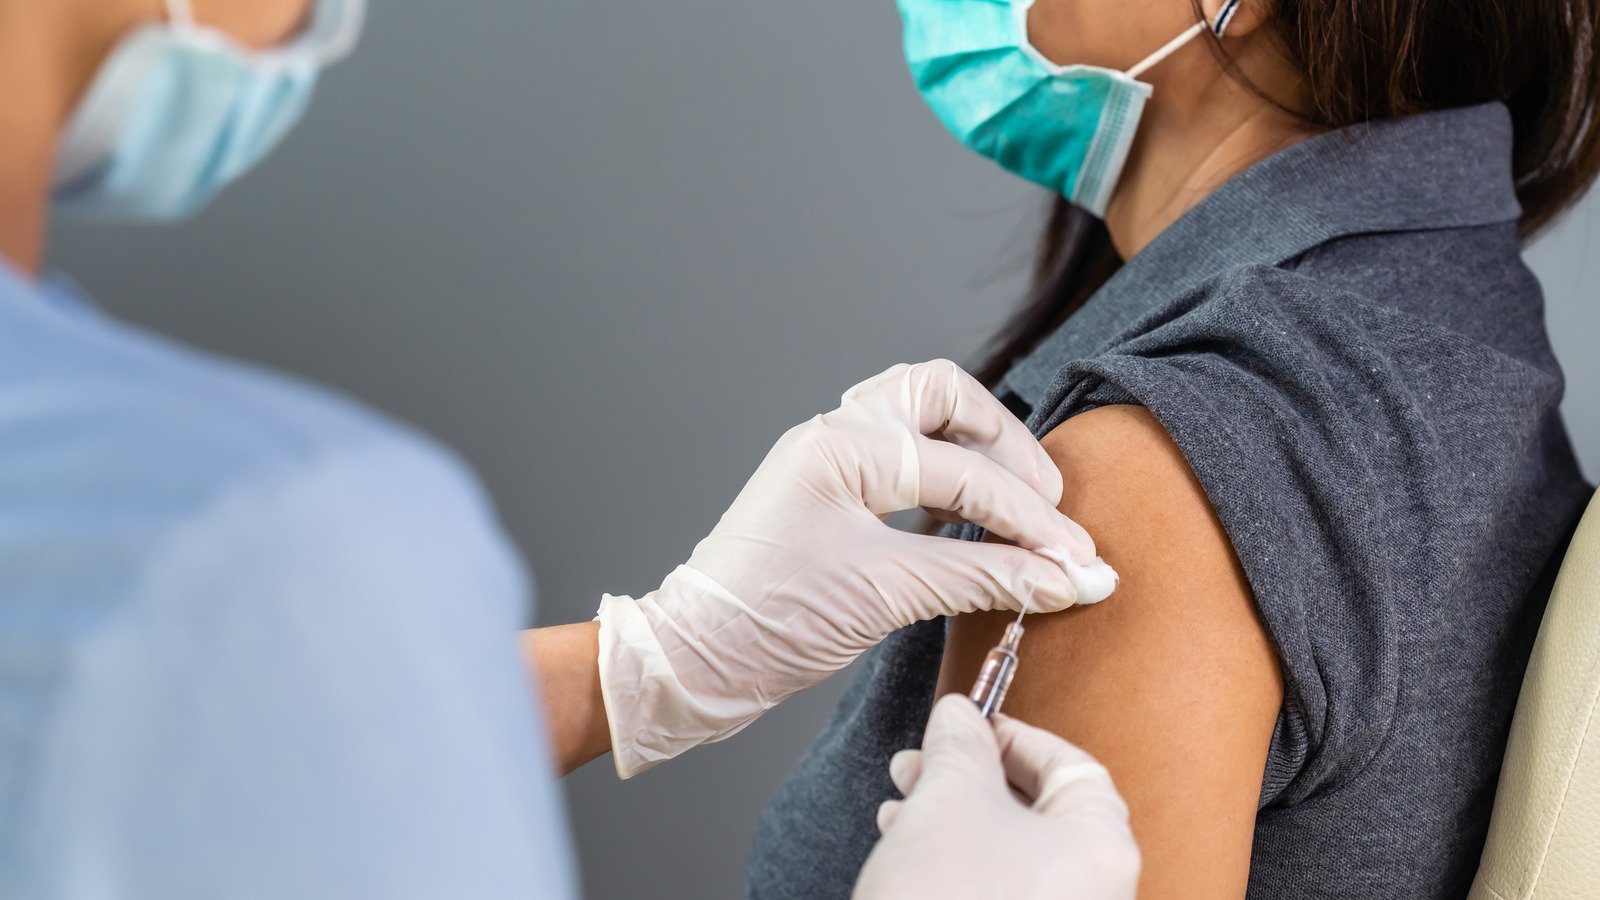 The Real Reason You Should Still Wear A Mask After A COVID-19 Vaccine - Health Digest